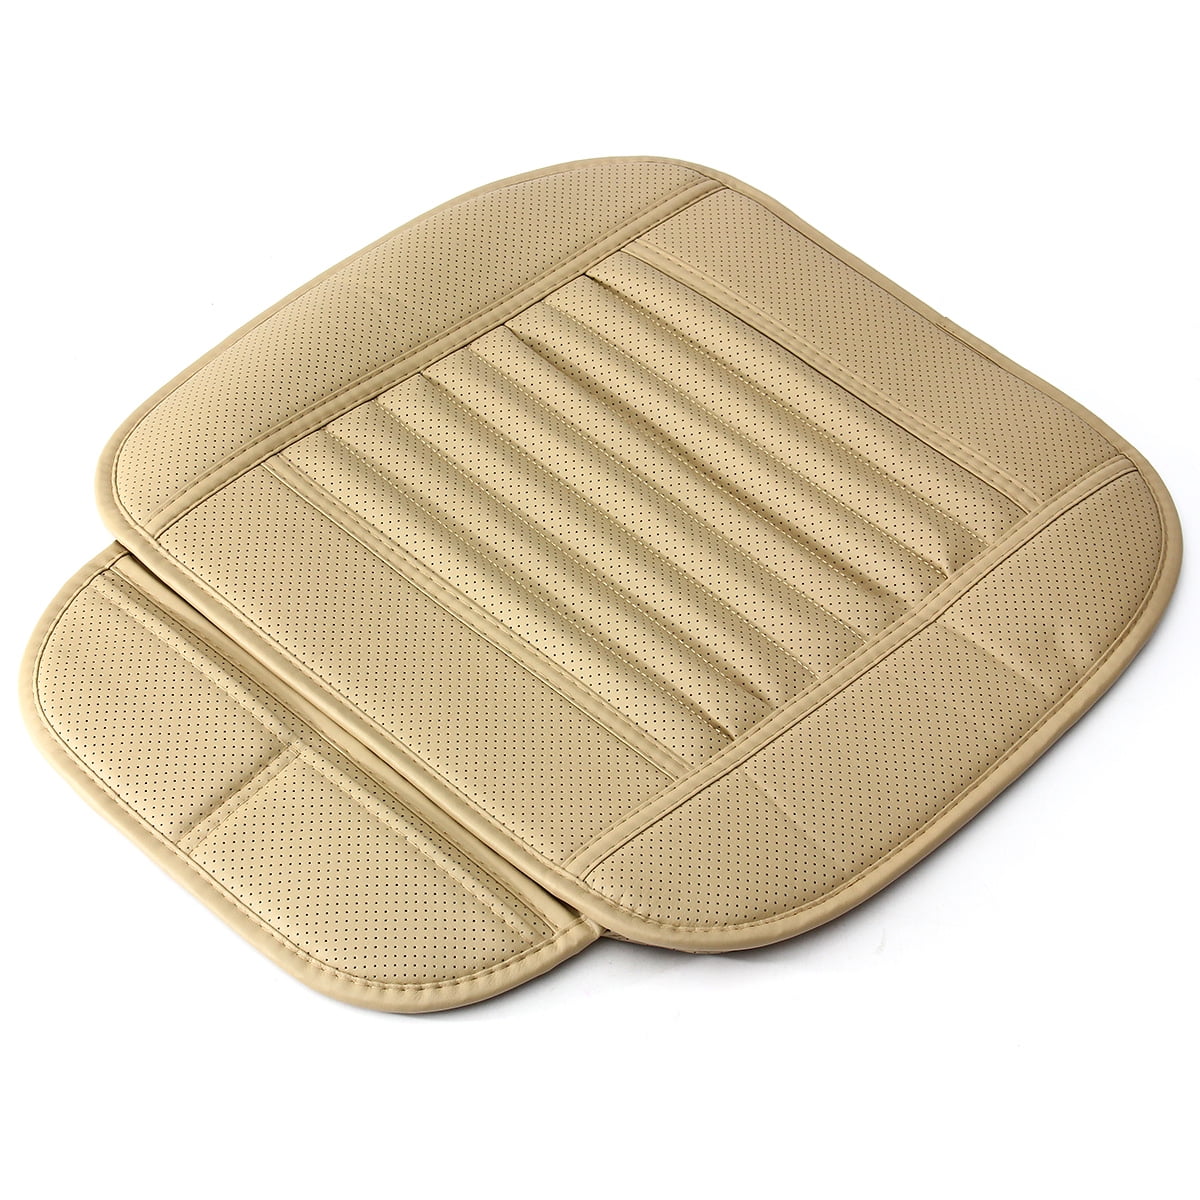 Suninbox Beige Car Seat Covers,Car Seat Pads Cushions for Automobiles,  Buckwheat Hulls Universal Bottom Seat Cover,Tan Driver Car Seat  Protector(Beige